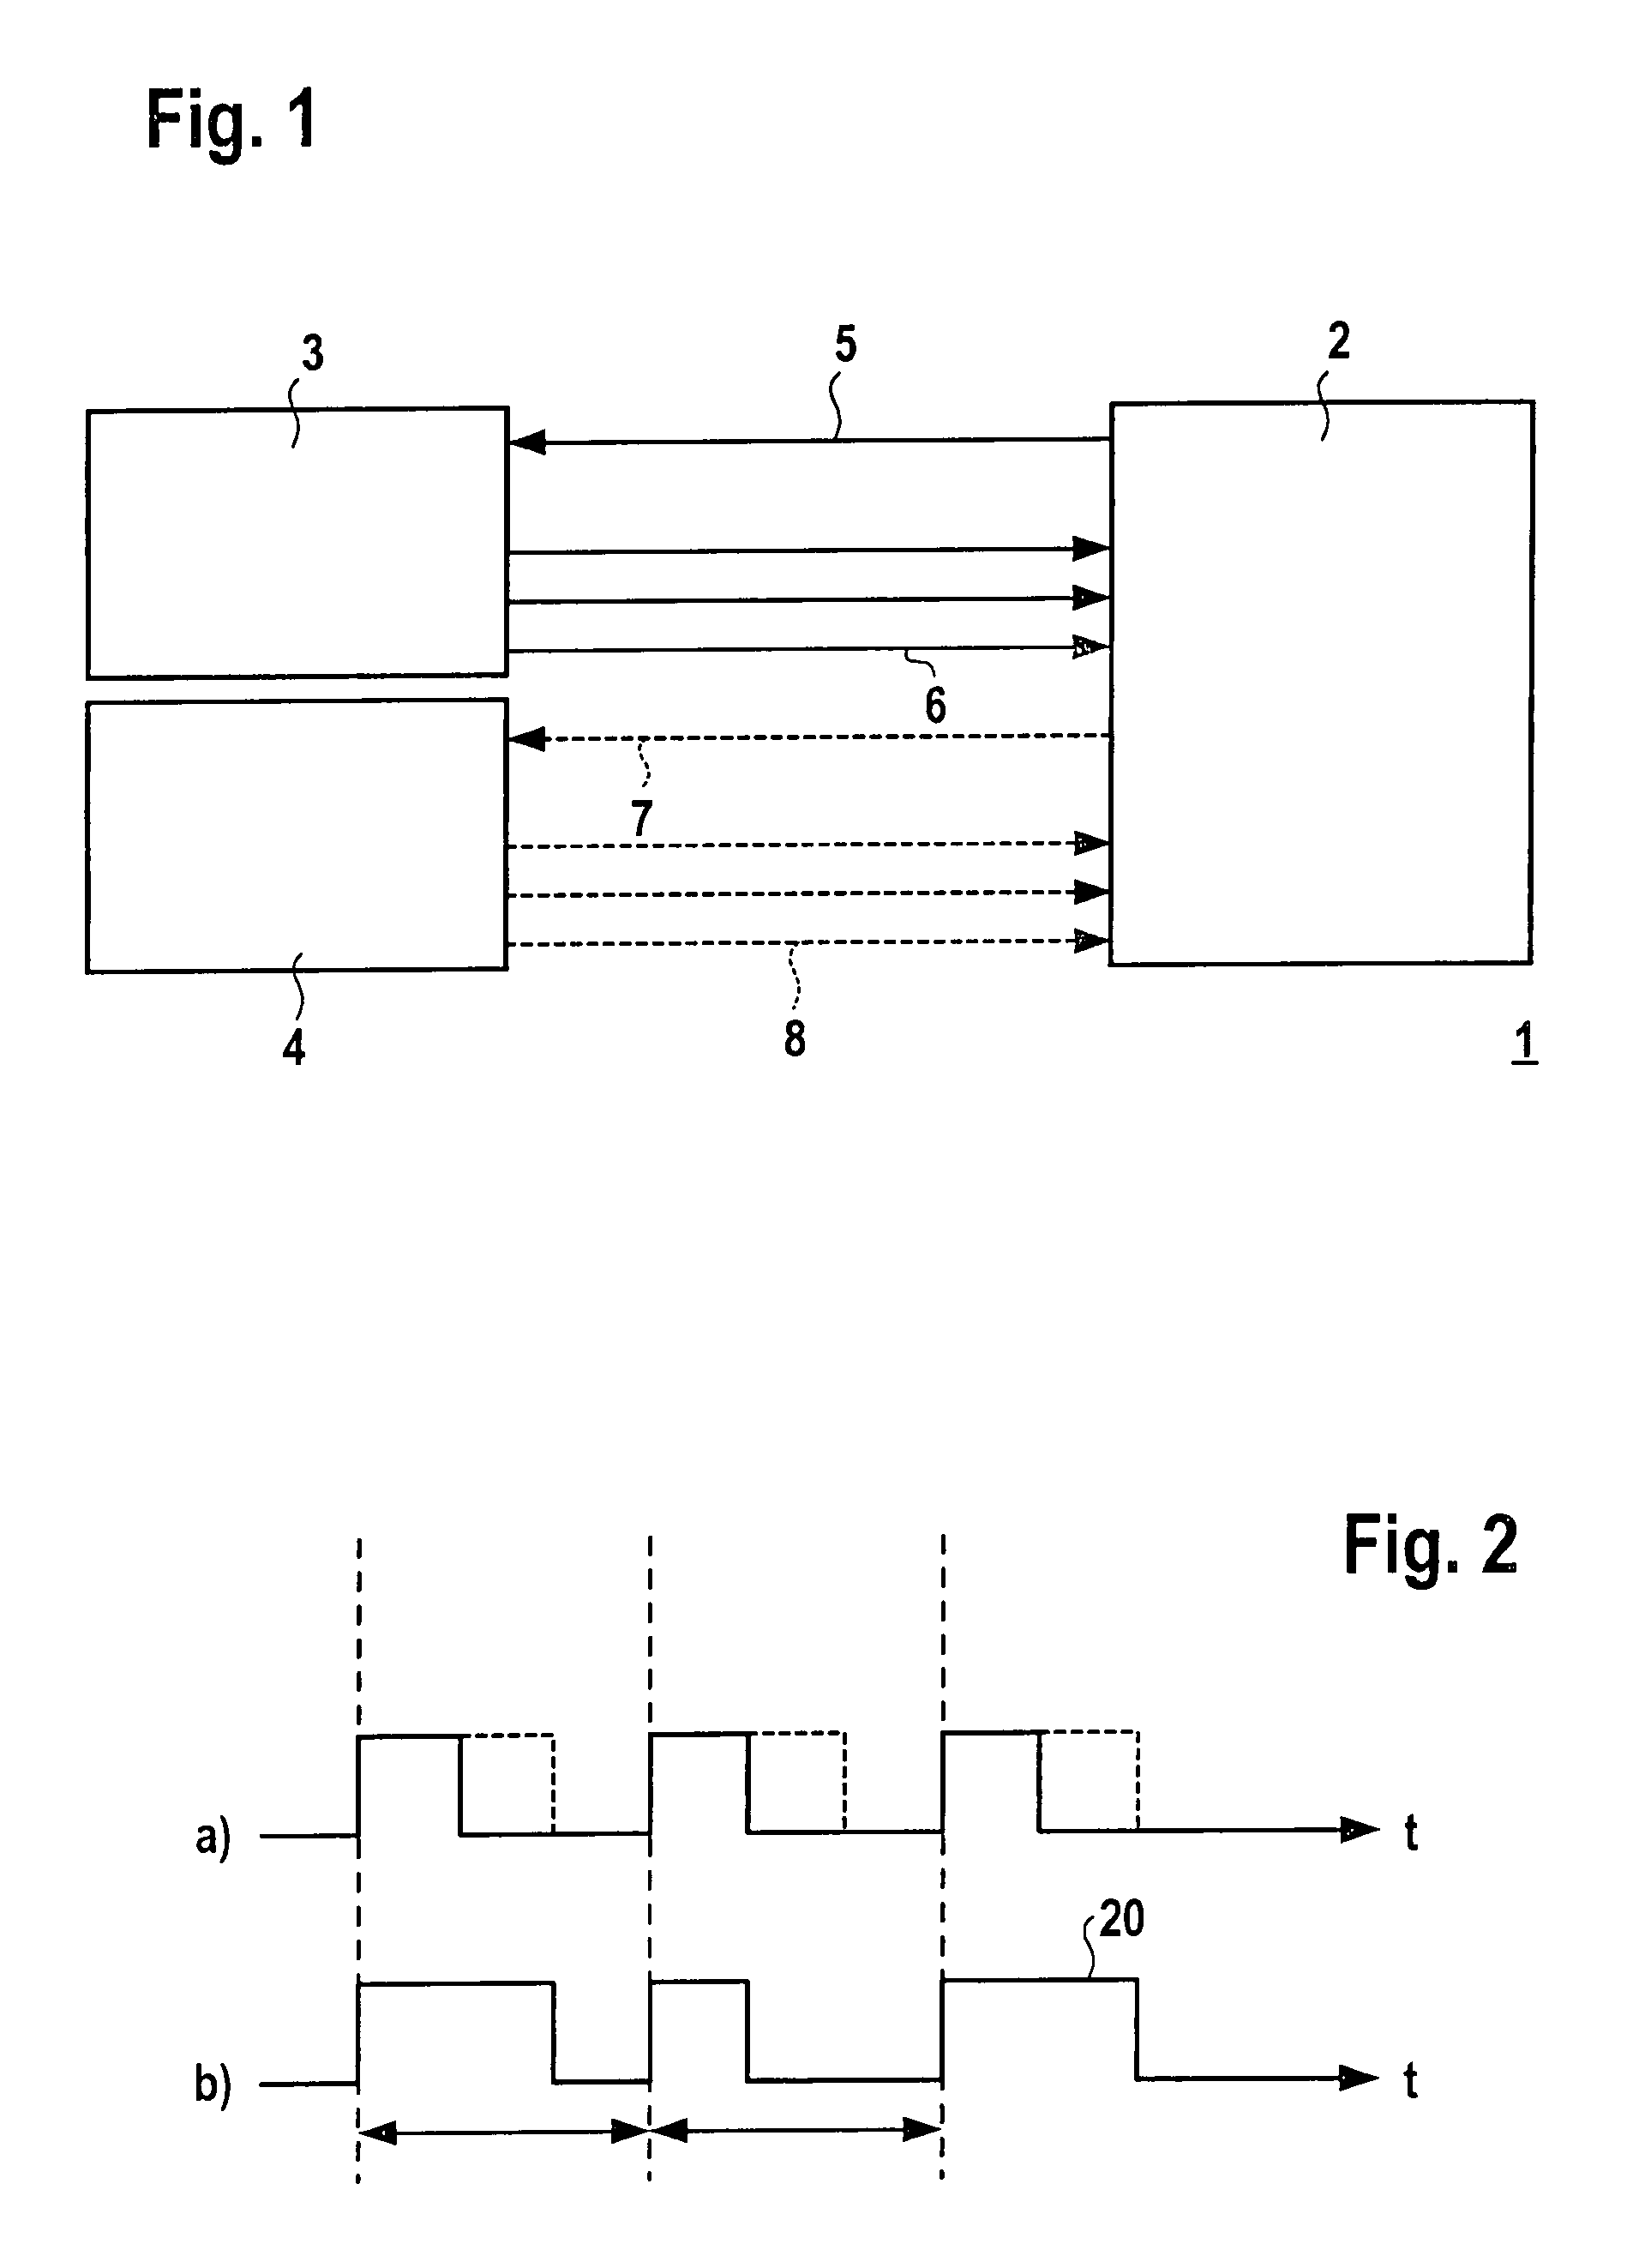 Image recording system with improved clock signal transmission